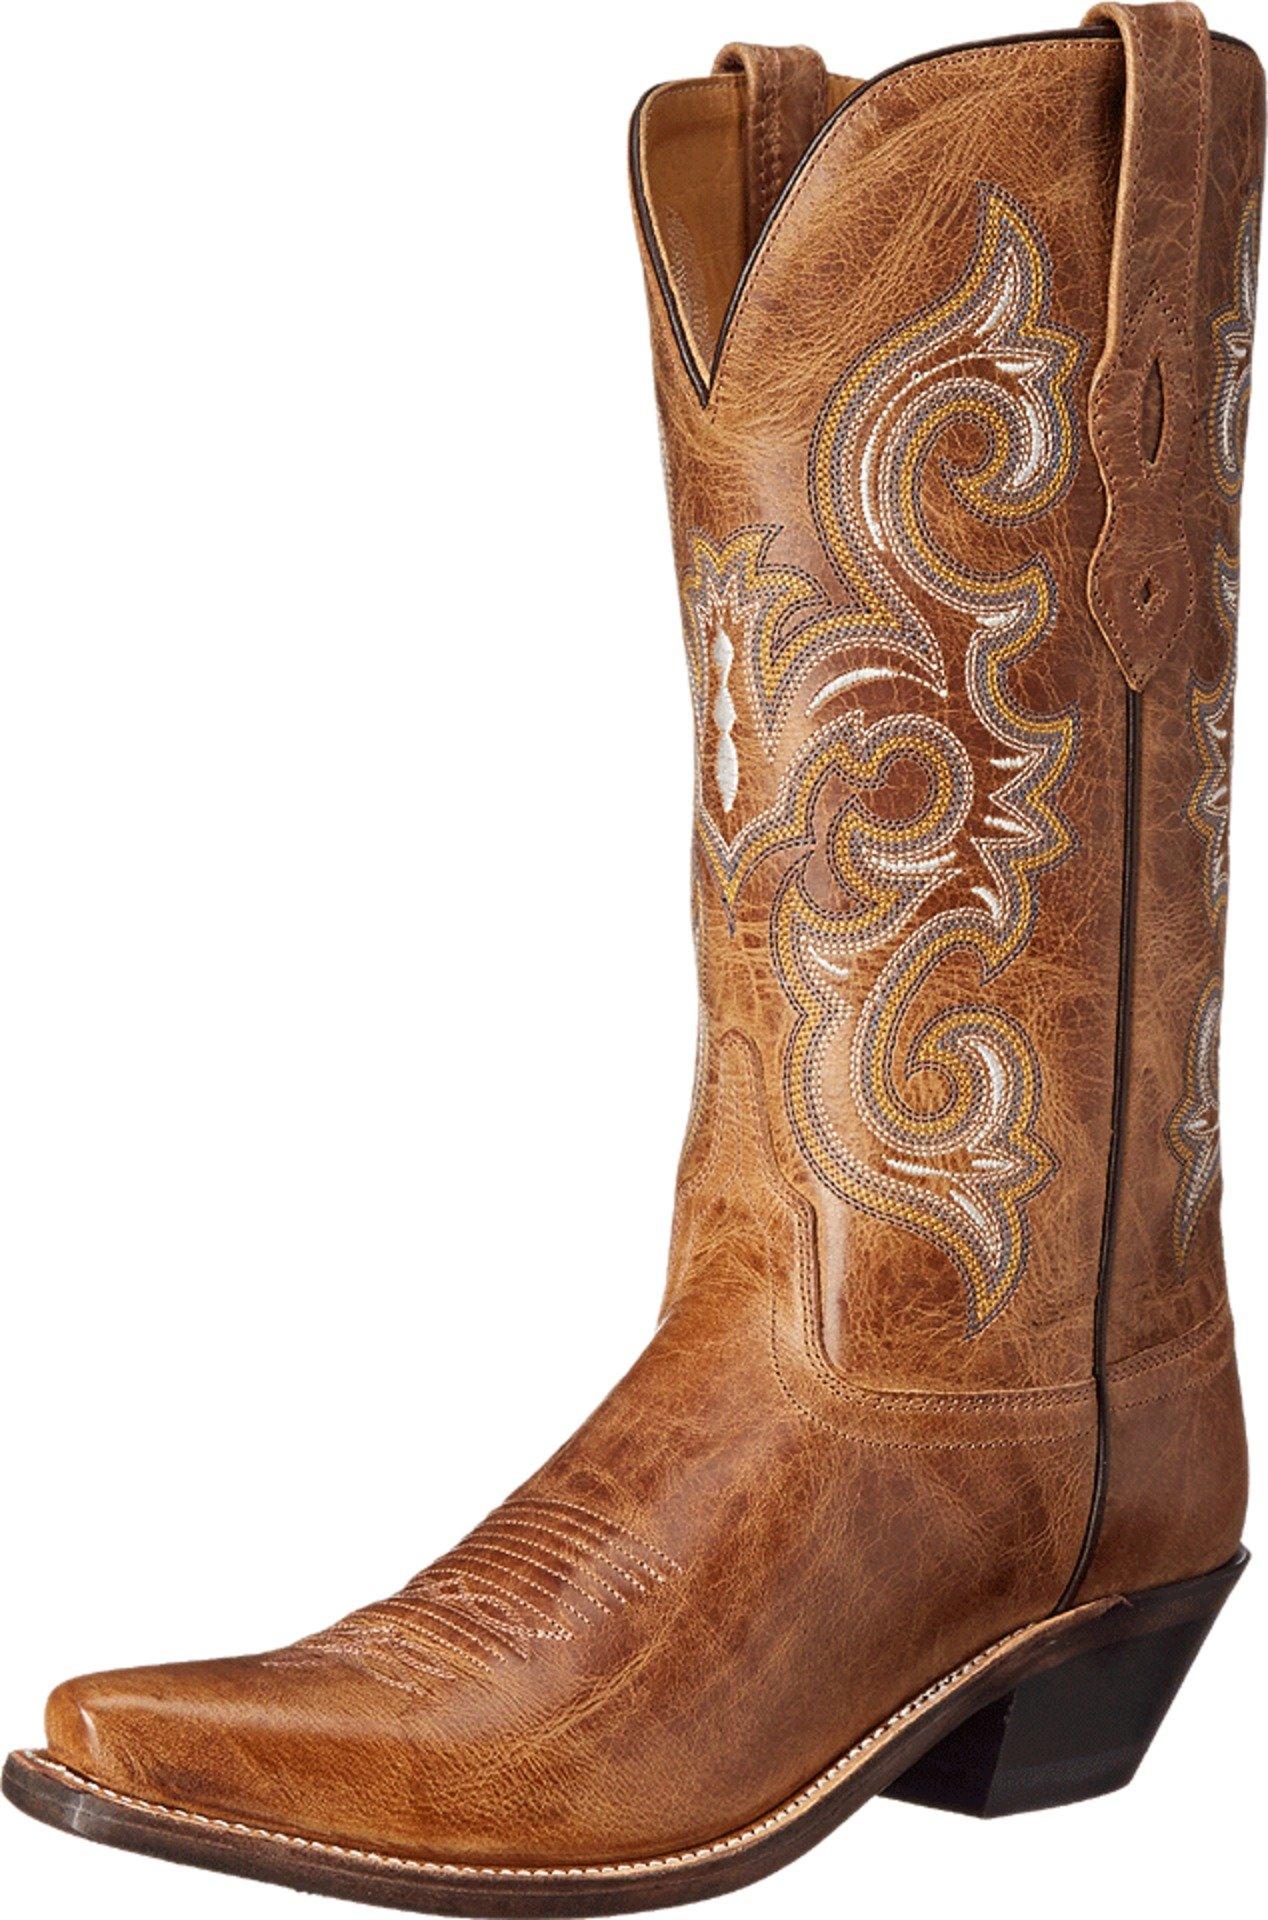 Old West Boots Leather Lf1541 in Brown - Lyst